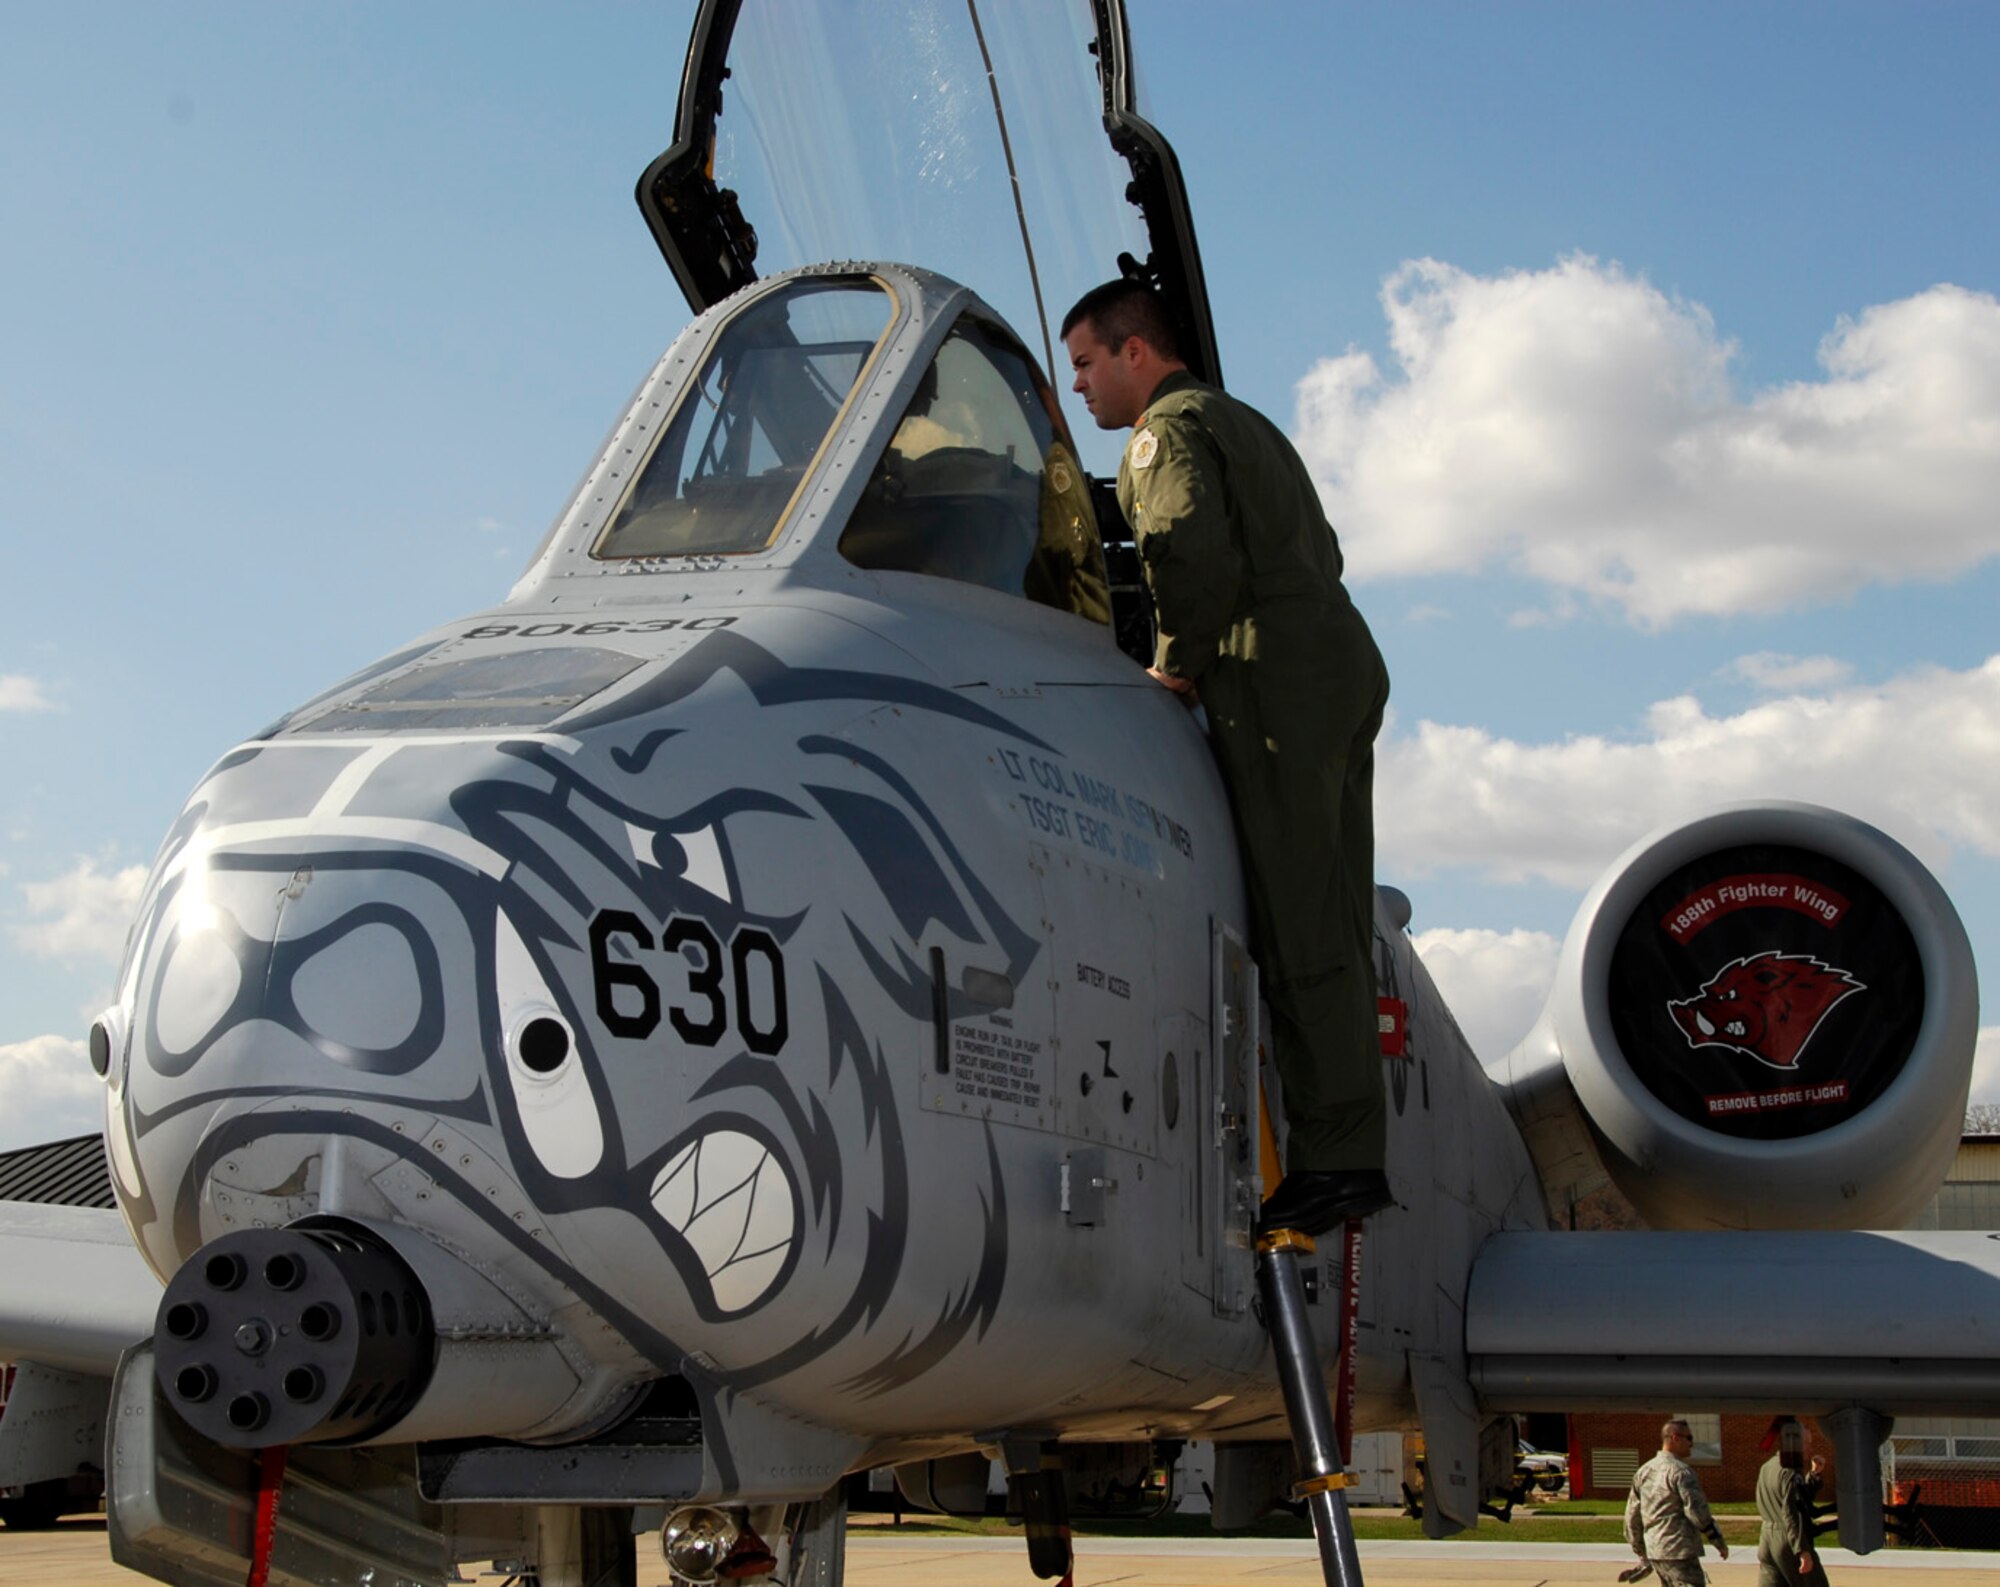 Maj. Jay Spohn, an A-10 Thunderbolt II "Warthog" pilot with the 188th Fighter Wing Arkansas Air National Guard, based in Fort Smith, Ark., prepares an A-10 for a photo shoot following a press conference held at the 188th Nov. 10, 2009. Spohn was the only Air National Guard pilot to be selected to fly the F-35 Lightning II Joint Strike Fighter in the program's initial cadre. (U.S. Air Force photo by Senior Master Sgt. Dennis Brambl/188th Fighter Wing Public Affairs)